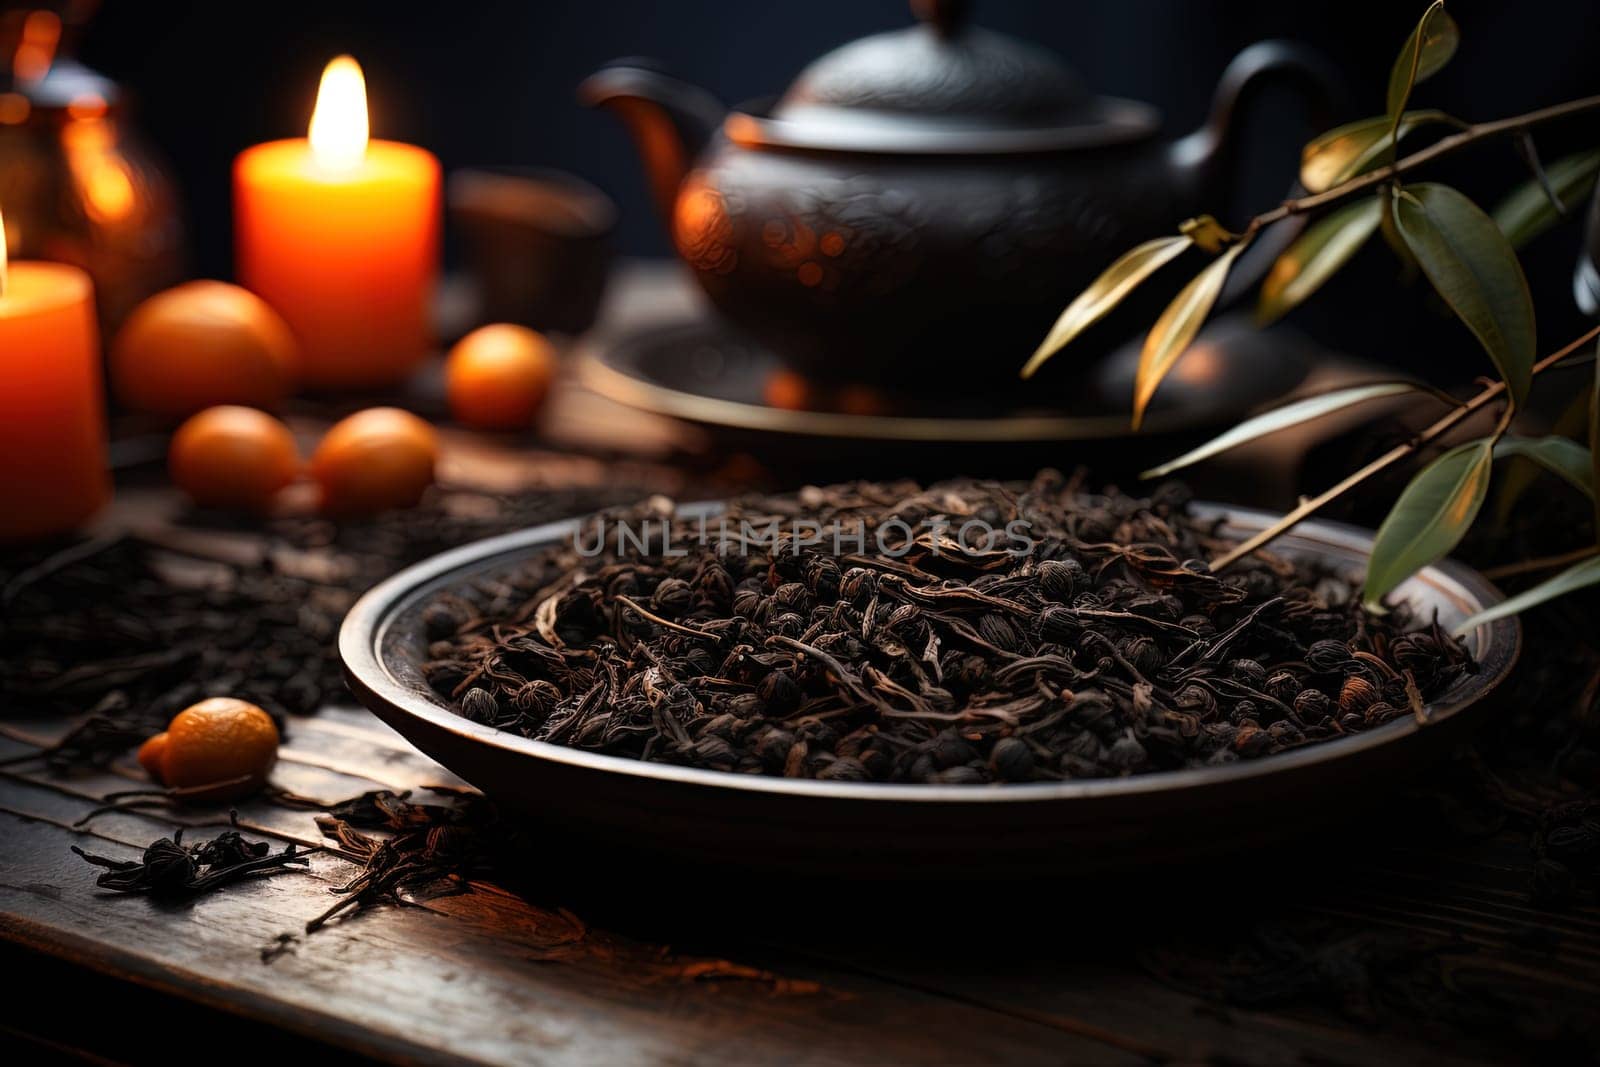 Dried tea leaves on background of decorated decorated wooden table by Dustick